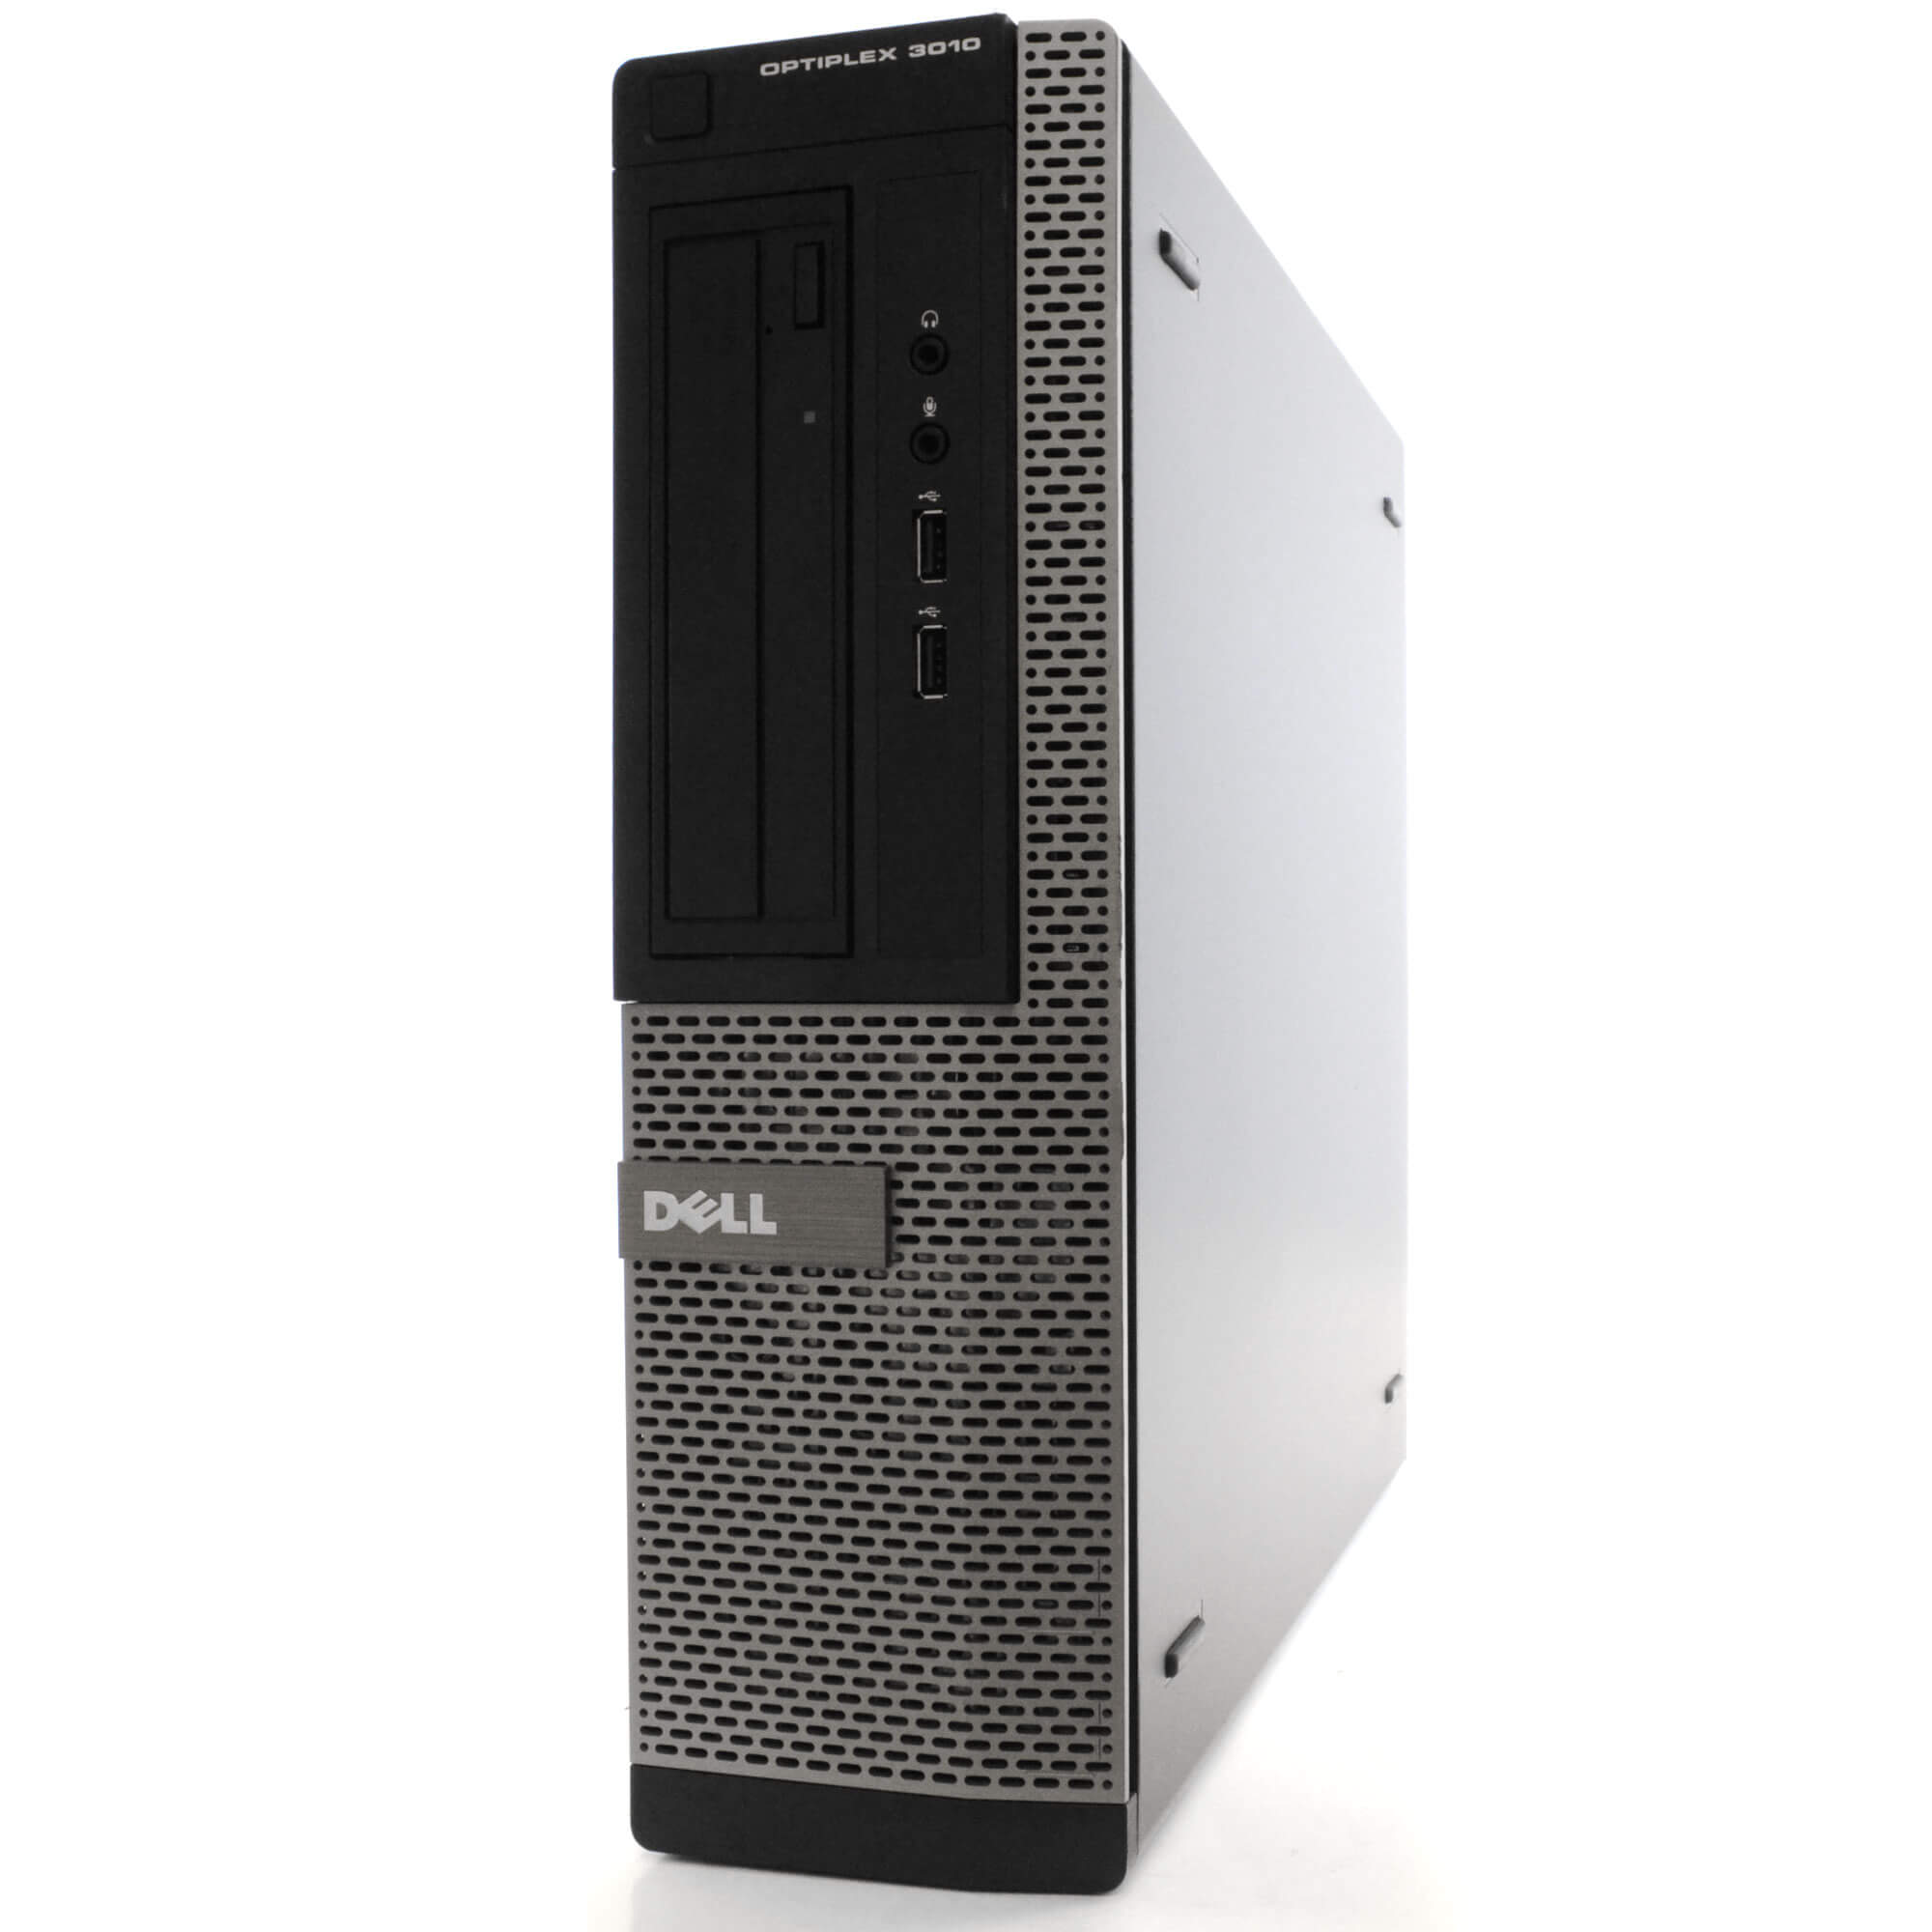 DELL Optiplex 3010 Desktop Computer PC, Intel Quad-Core i5, 120GB SSD, 8GB DDR3 RAM, Windows 10 Home, DVD, WIFI, USB Keyboard and Mouse (Used - Like New) - image 3 of 7